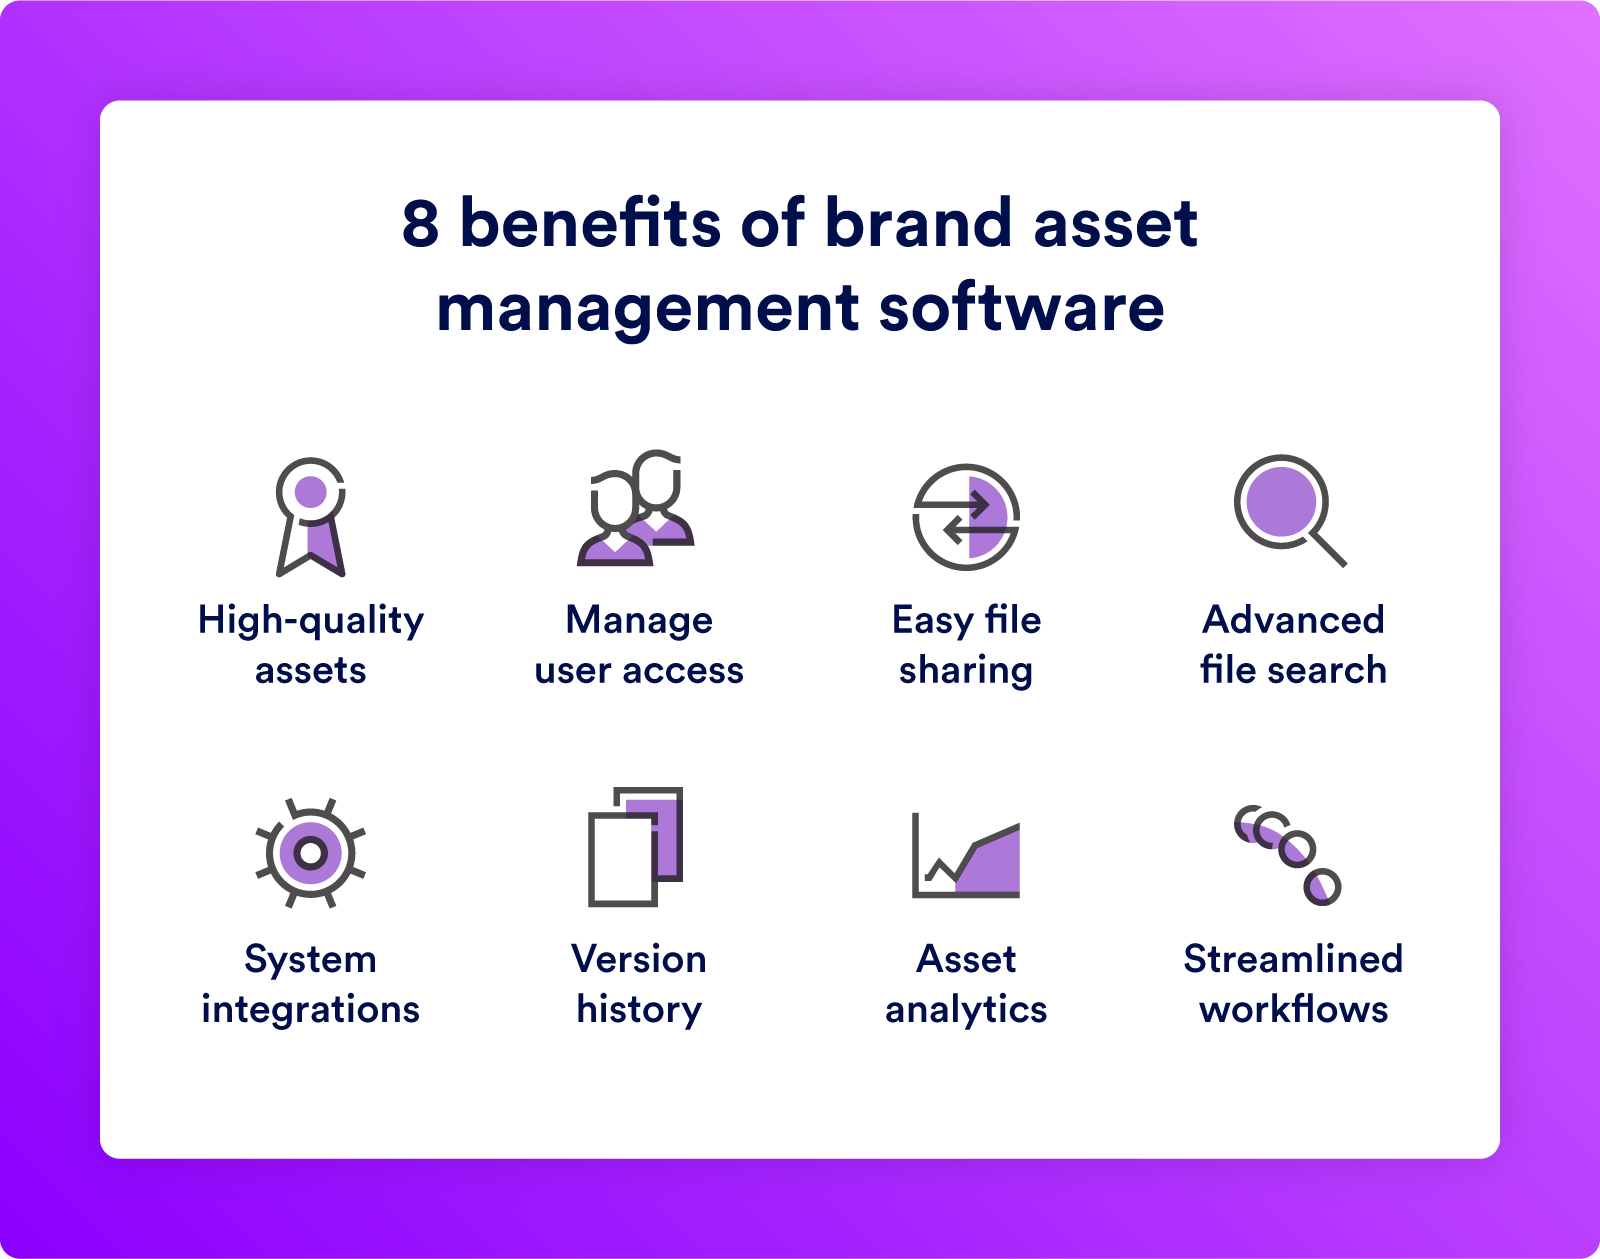 How to execute your brand asset management strategy in four steps.